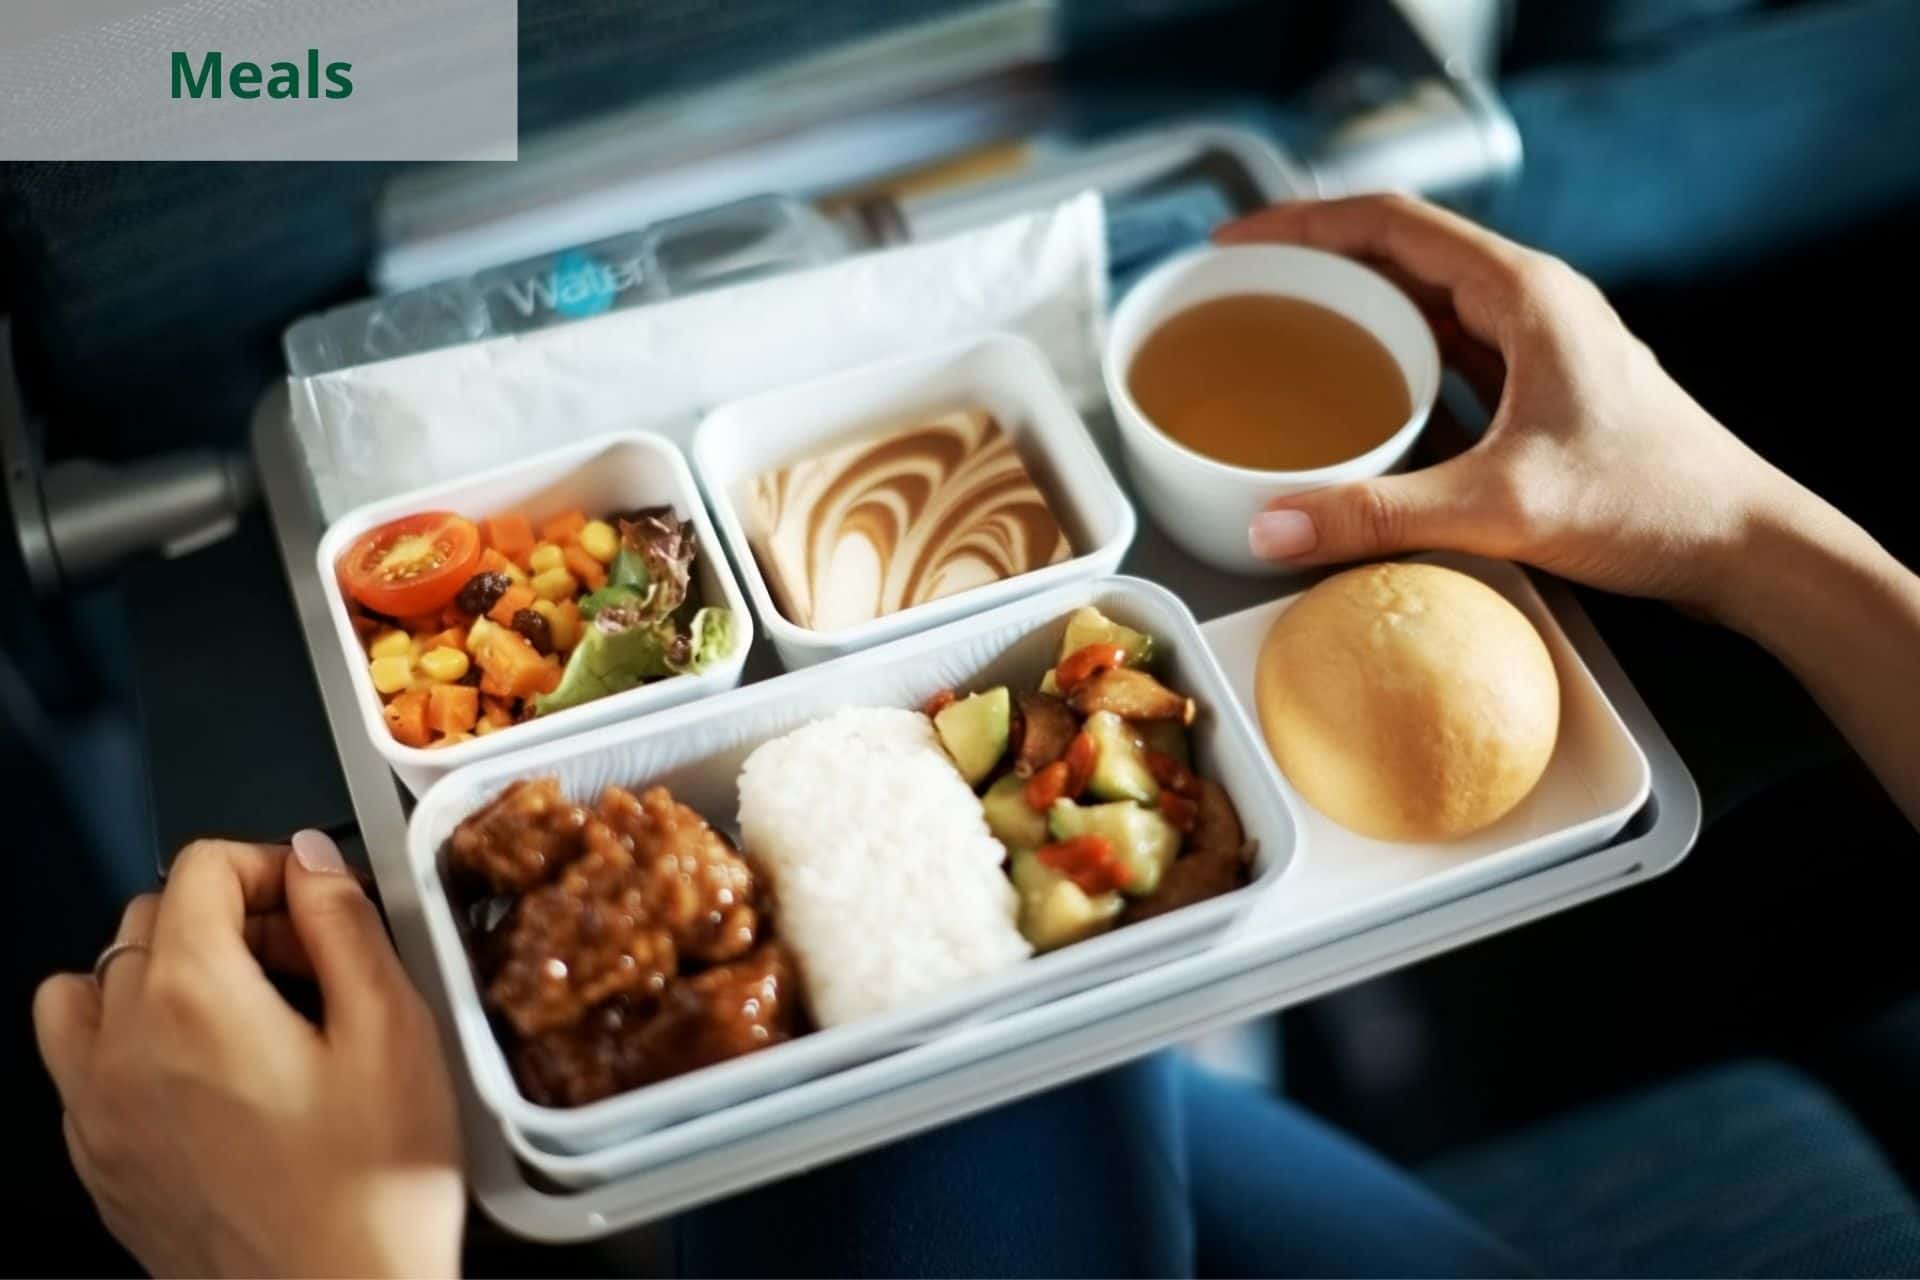 Cathay pacific Meals